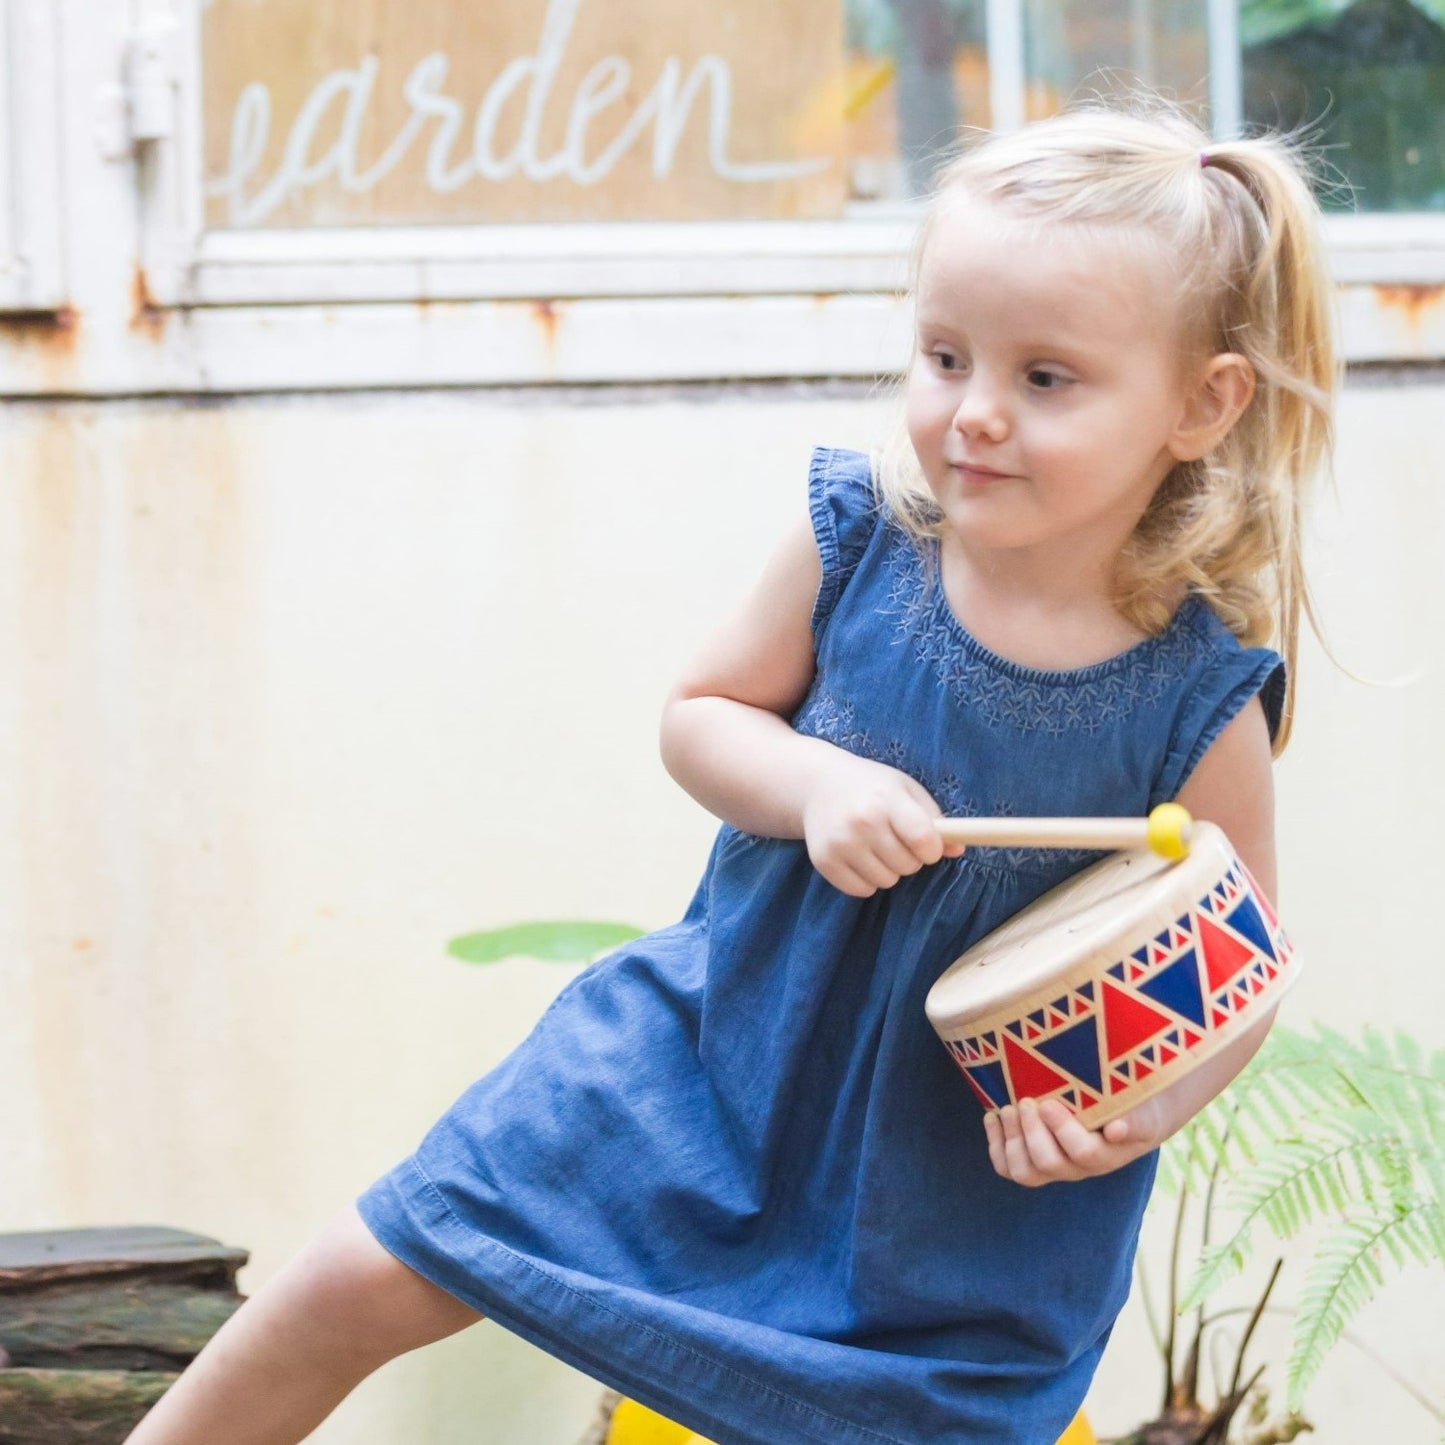 The Solid Drum is made from natural rubberwood and stained with non-toxic water-based pigments. Free from harmful chemicals and sharp edges the toy is safe for all little ones.